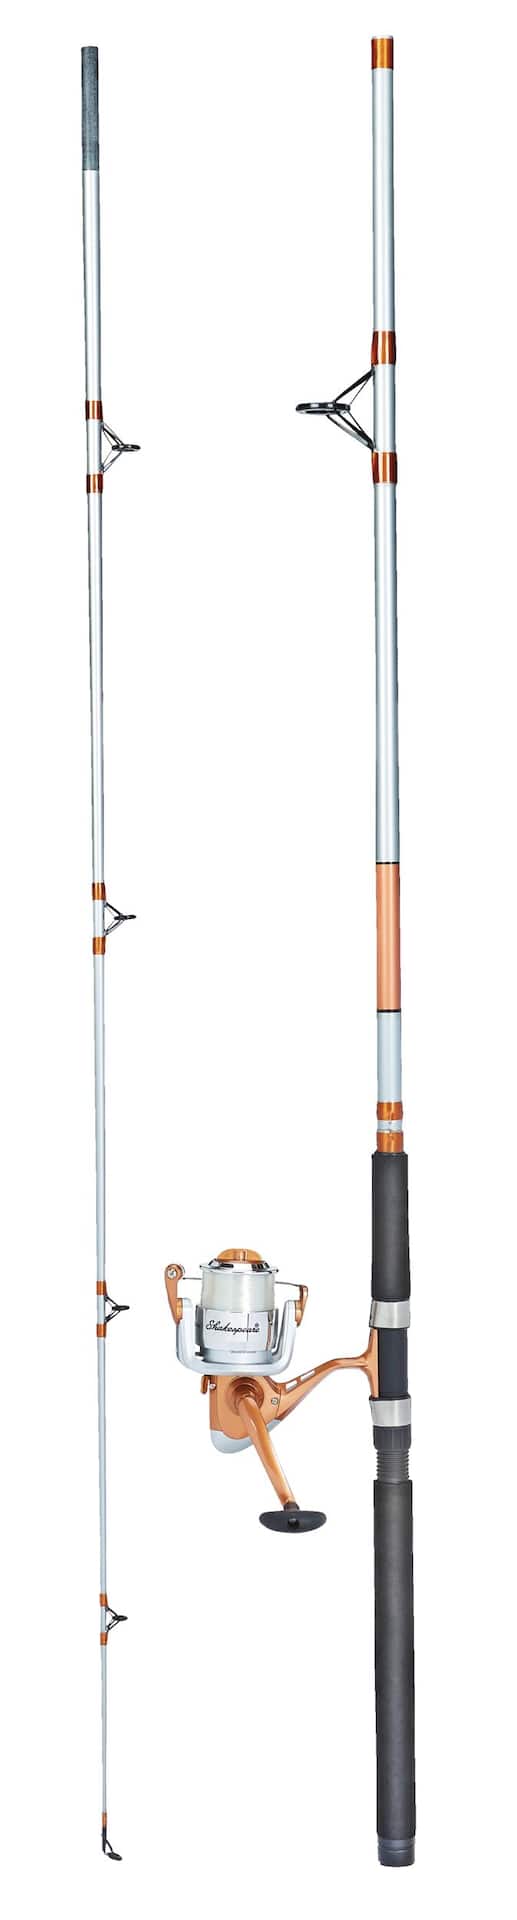 https://media-www.canadiantire.ca/product/playing/fishing/fishing-equipment/0777986/shakespeare-catch-more-fish-spinning-combo-salmon-a76c940a-e706-416c-be01-6a945022fd3f-jpgrendition.jpg